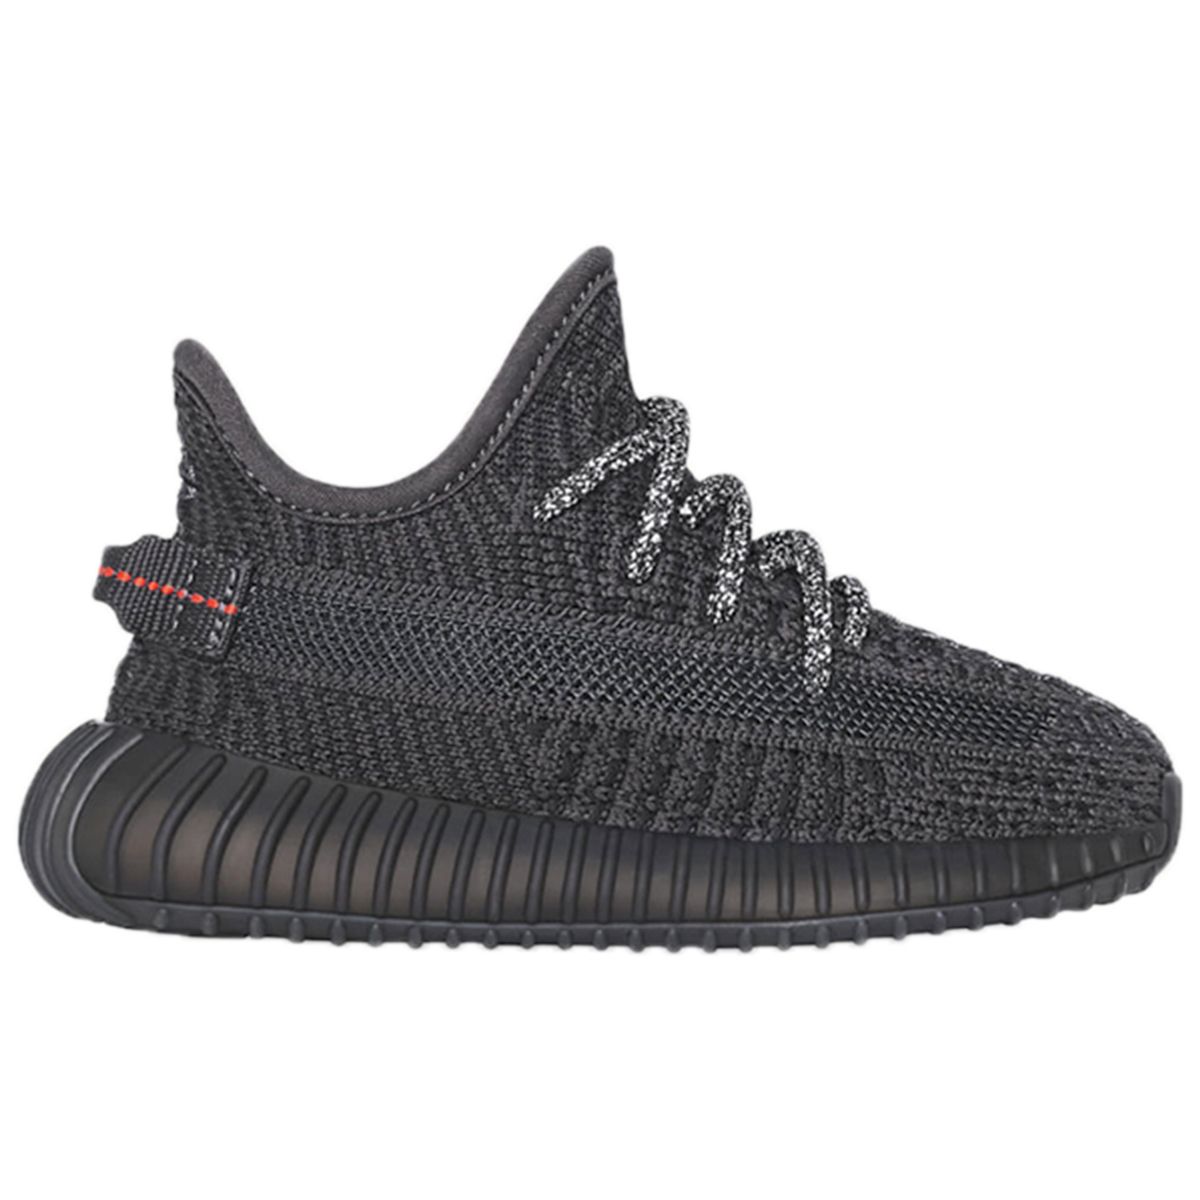 Adidas Yeezy Boost 350 V2 Toddlers 